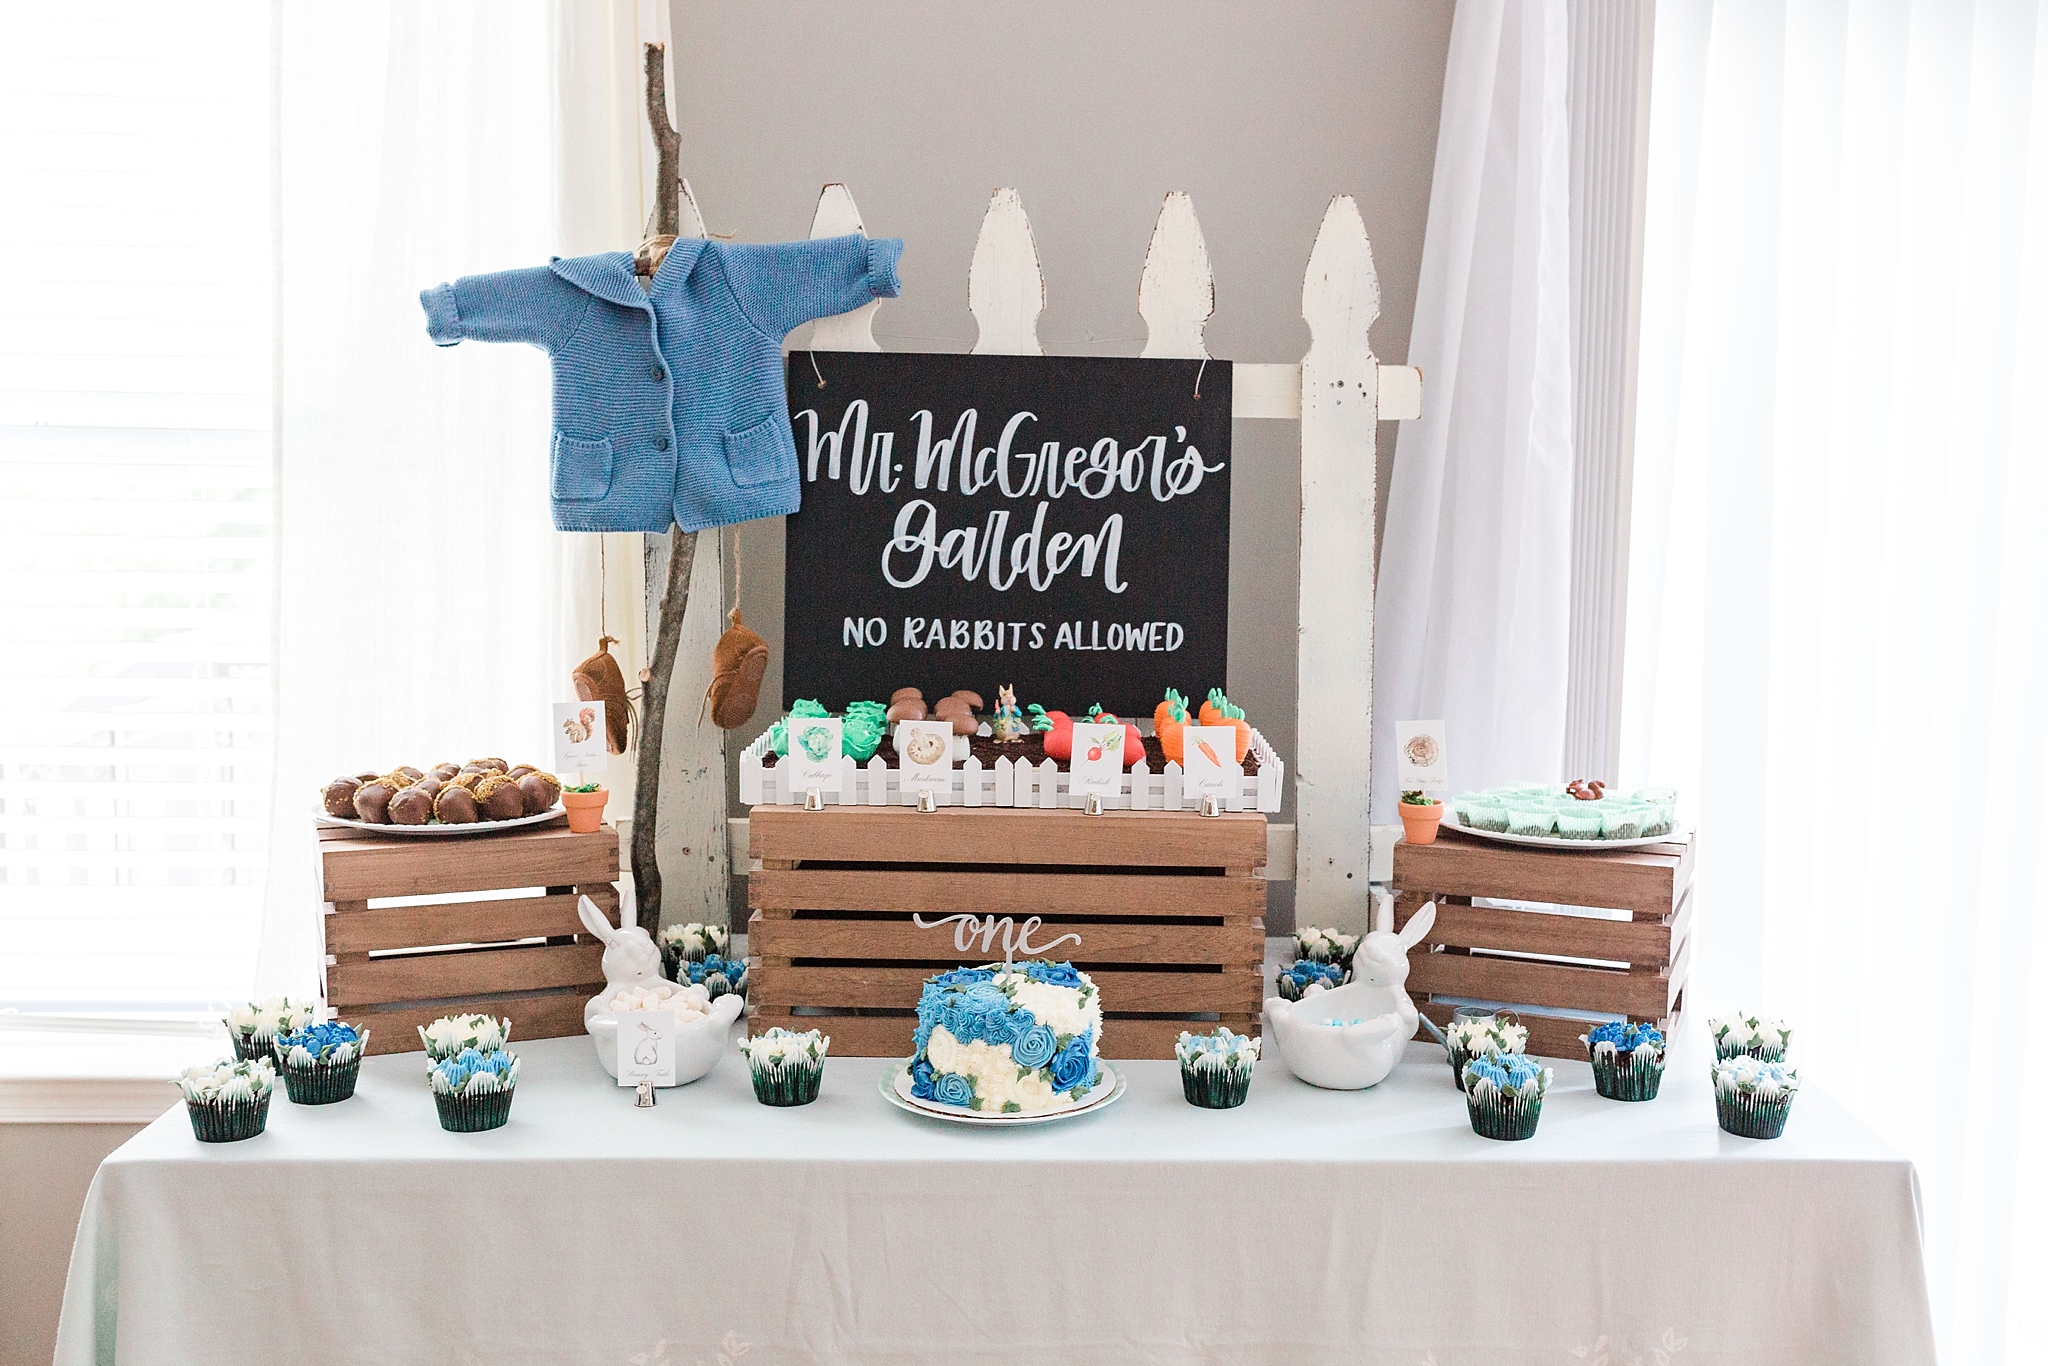 A stunning Peter Rabbit first birthday party complete with a cake pop vegetable garden, dessert station, mimosa bar, and custom cookies!